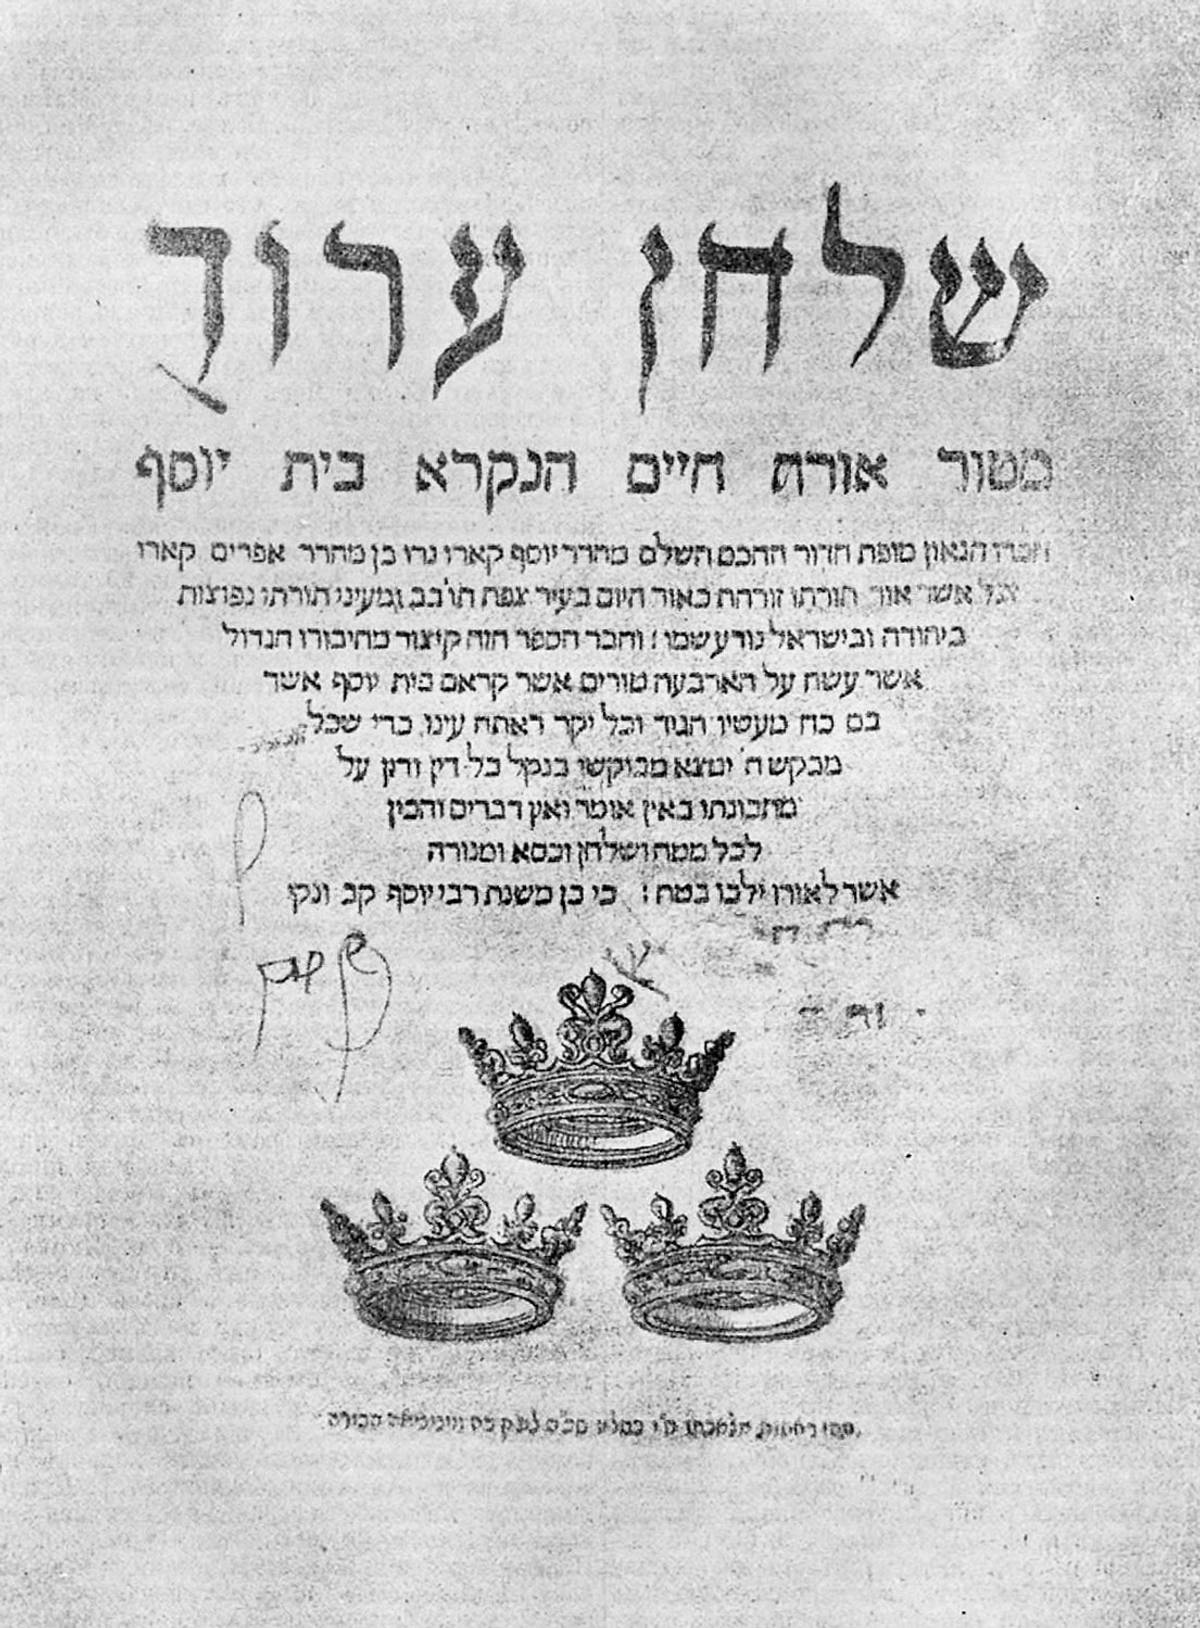 The cover page of Karo's Shulchan ‘Arukh